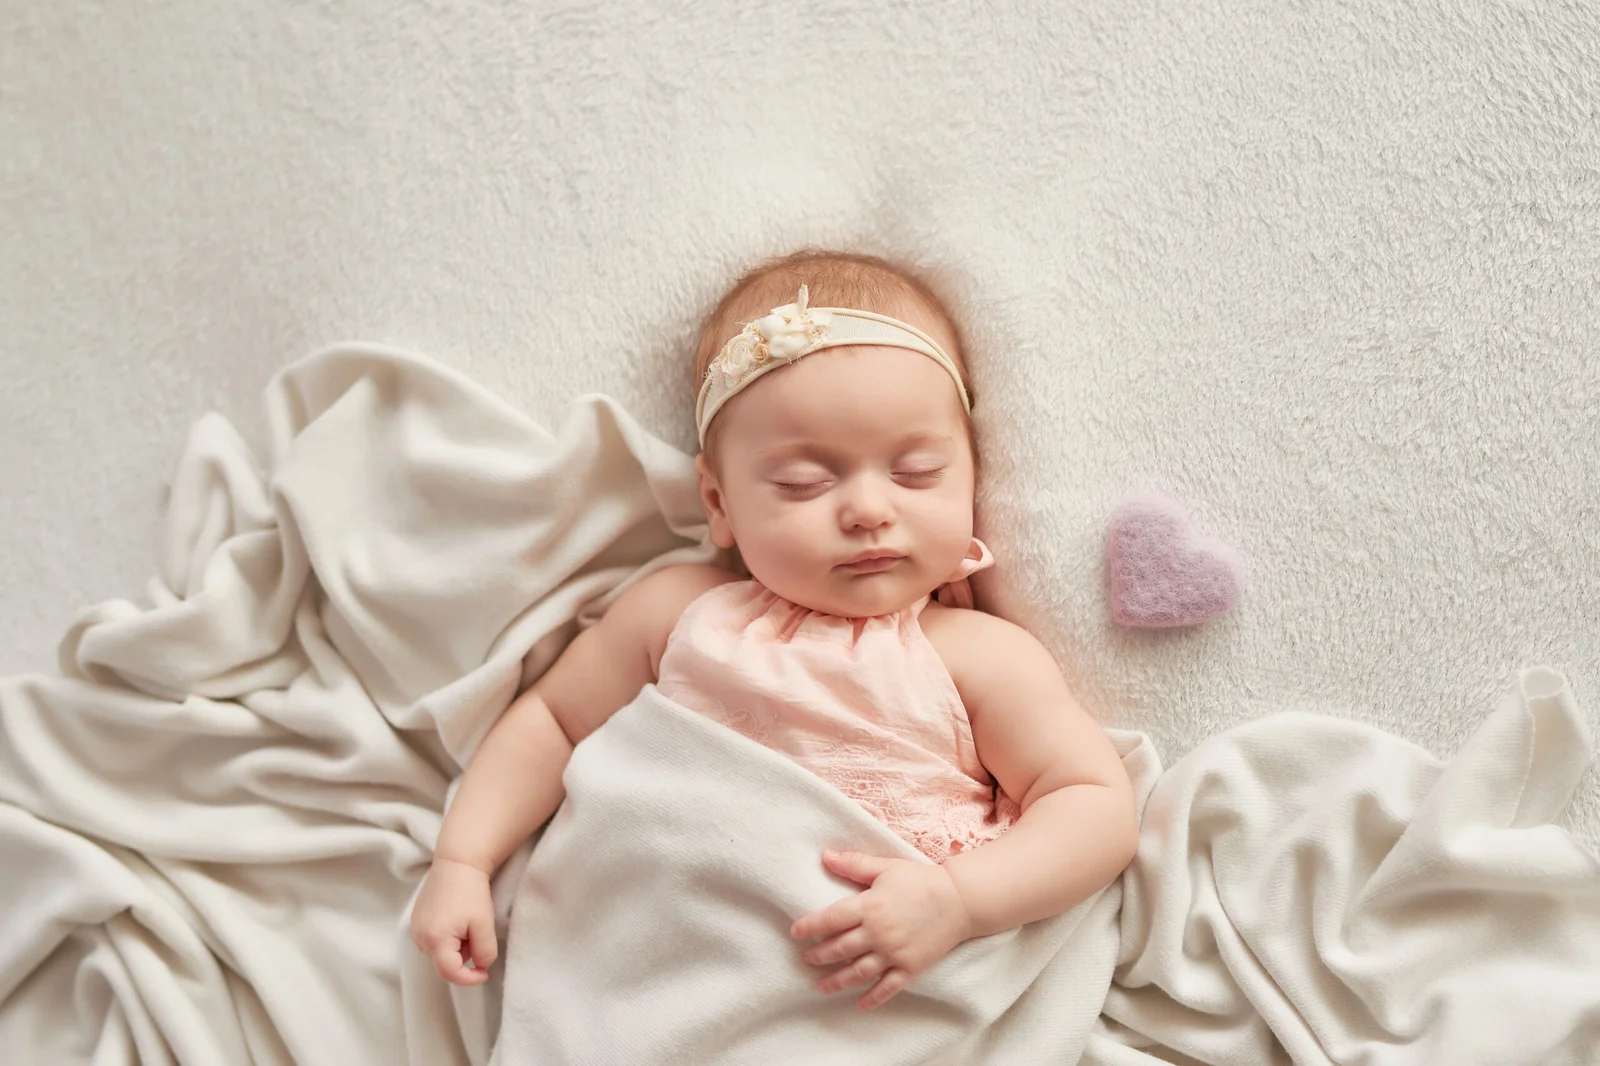 How to Put a 9-Month-Old Baby to Sleep?